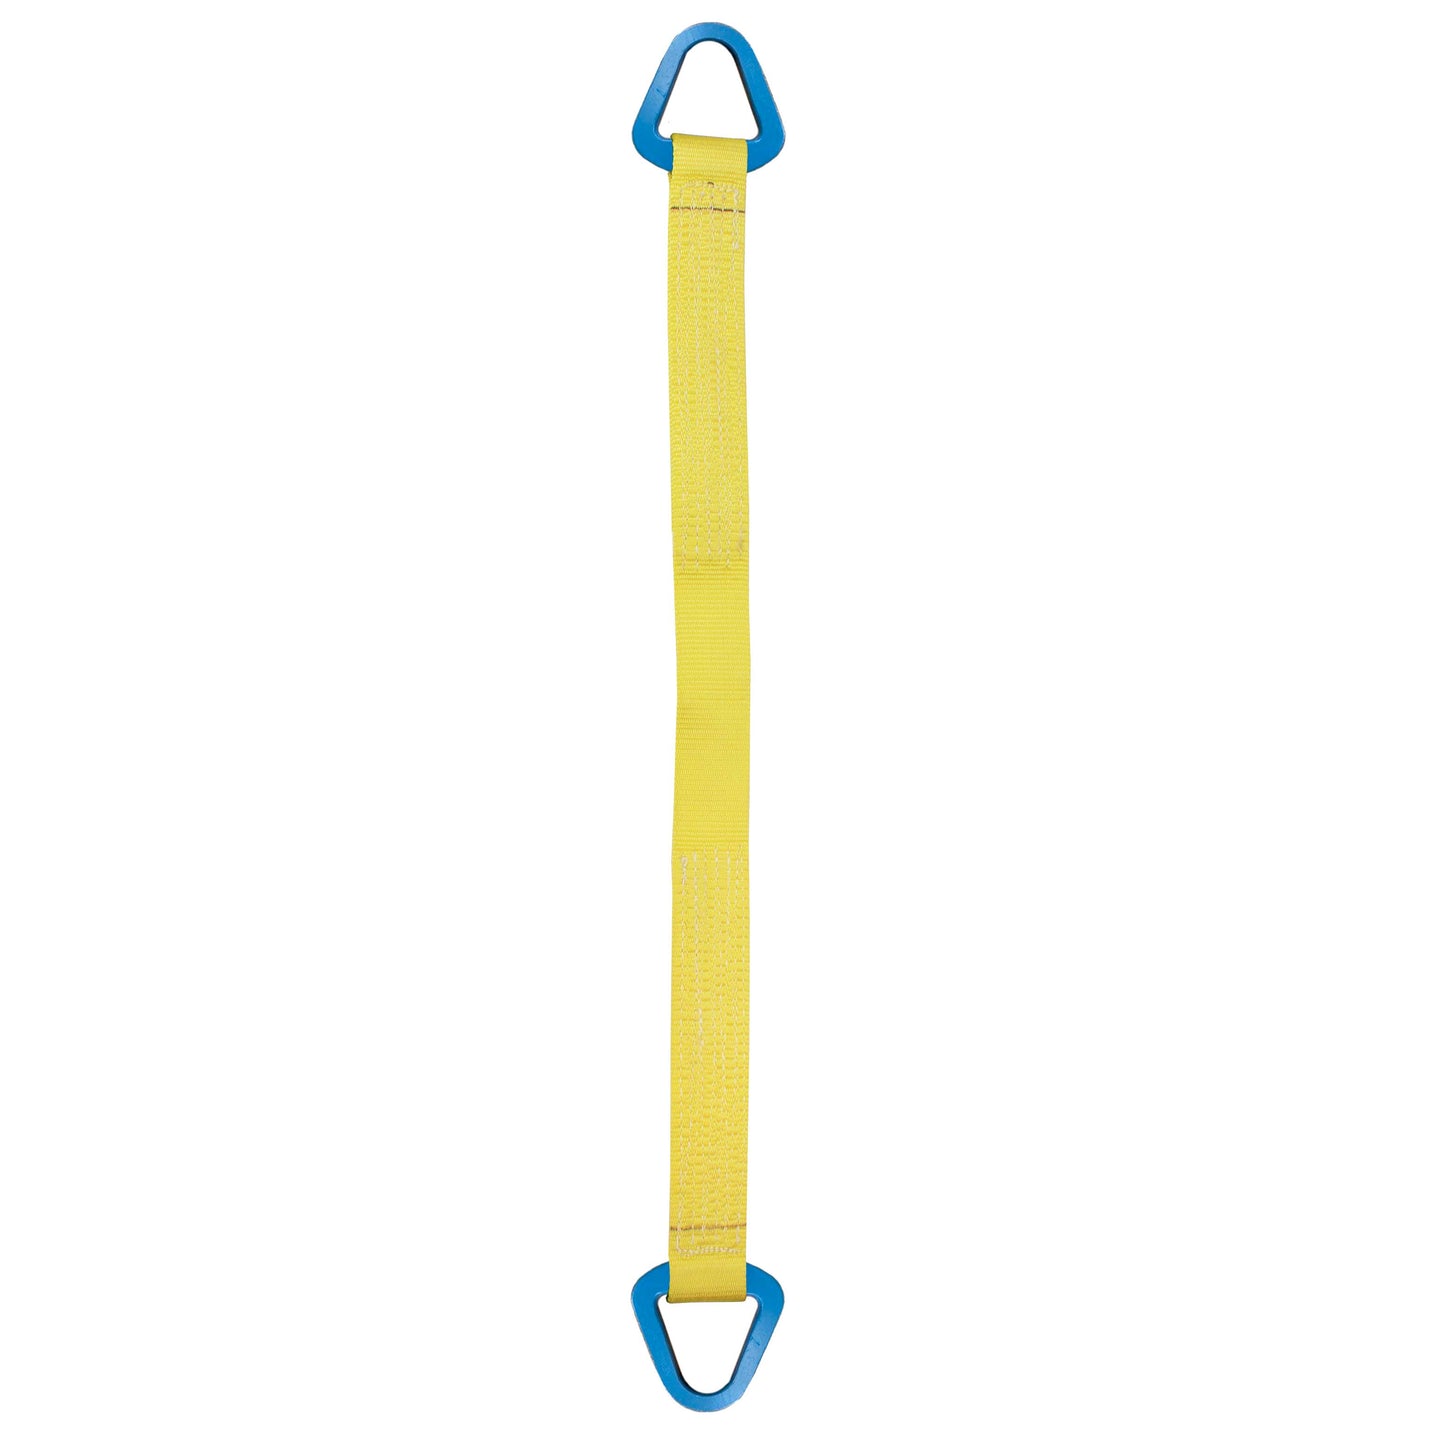 Nylon Lifting Sling Triangle 8 inch x 6 foot 2ply image 1 of 2